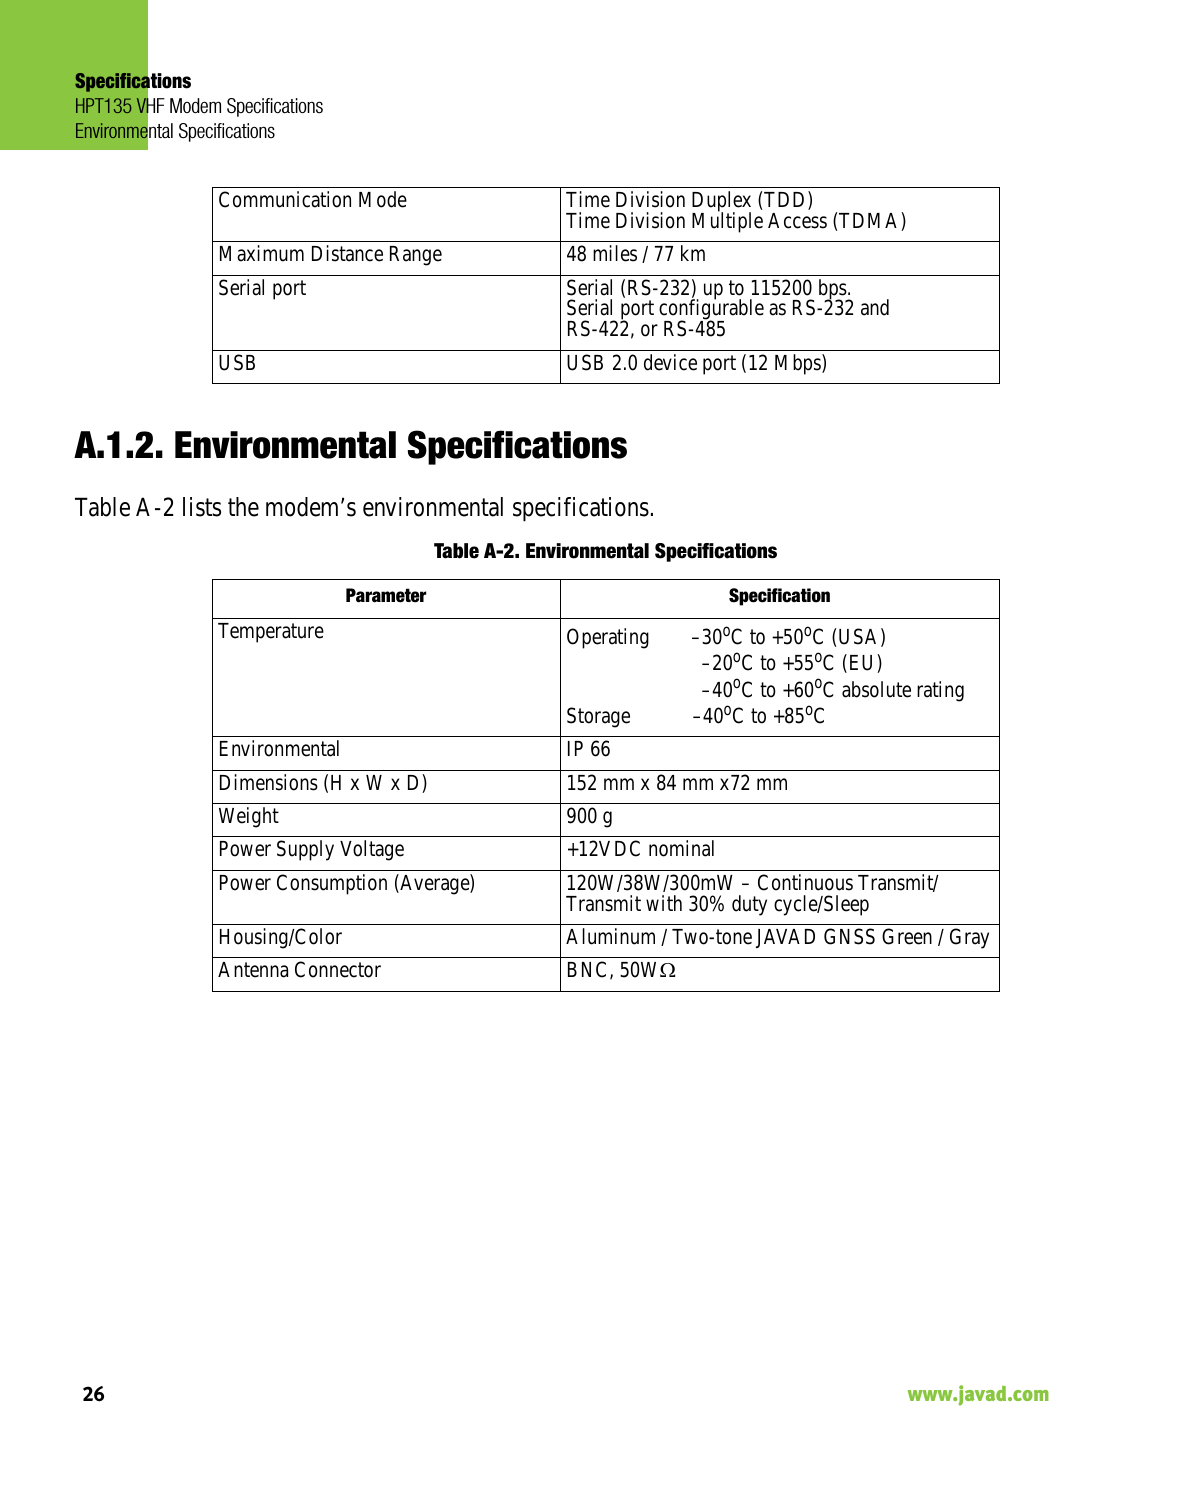 SpecificationsHPT135 VHF Modem SpecificationsEnvironmental Specifications26                                                                                                                     www.javad.comA.1.2. Environmental SpecificationsTable A-2 lists the modem’s environmental specifications.Table A-2. Environmental SpecificationsCommunication Mode Time Division Duplex (TDD)Time Division Multiple Access (TDMA)Maximum Distance Range 48 miles / 77 kmSerial port Serial (RS-232) up to 115200 bps.Serial port configurable as RS-232 andRS-422, or RS-485USB USB 2.0 device port (12 Mbps)Parameter SpecificationTemperature Operating        –30oC to +50oC (USA)                          –20oC to +55oC (EU)                          –40oC to +60oC absolute ratingStorage            –40oC to +85oCEnvironmental IP 66Dimensions (H x W x D) 152 mm x 84 mm x72 mmWeight 900 gPower Supply Voltage +12VDC nominalPower Consumption (Average) 120W/38W/300mW – Continuous Transmit/Transmit with 30% duty cycle/SleepHousing/Color Aluminum / Two-tone JAVAD GNSS Green / GrayAntenna Connector BNC, 50W